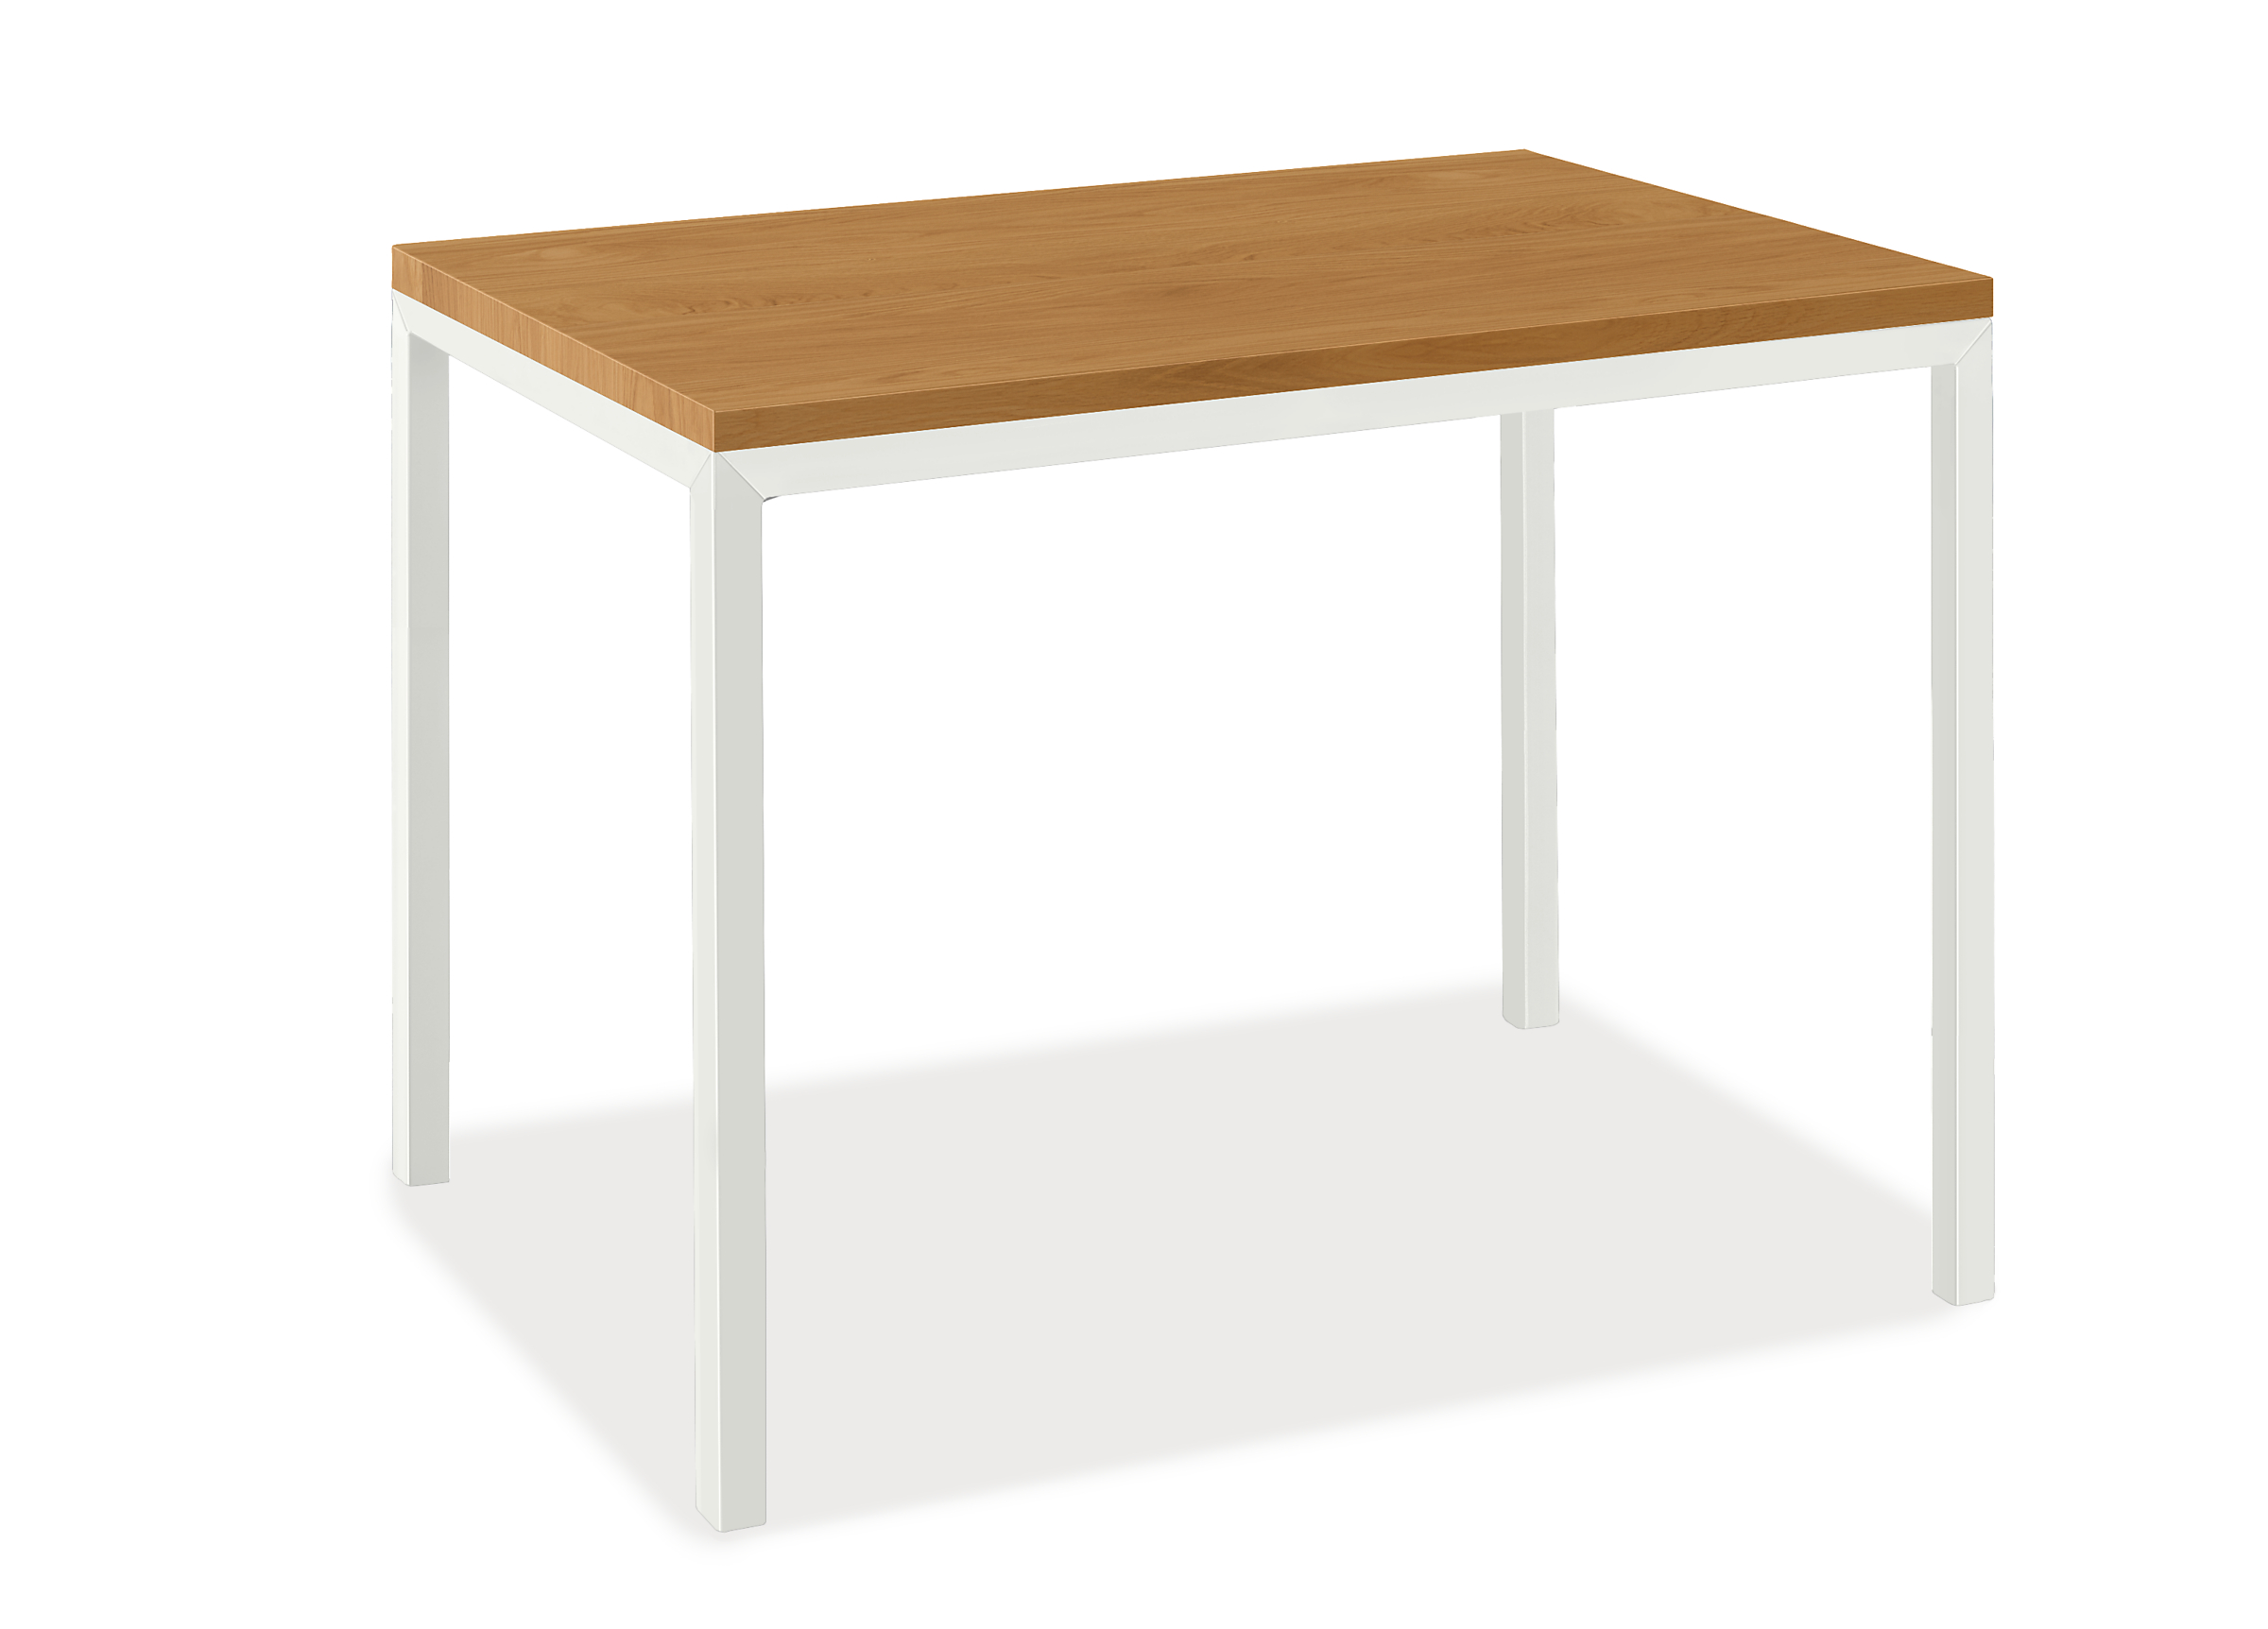 Parsons 30w 20d 24h End Table with 1" Leg